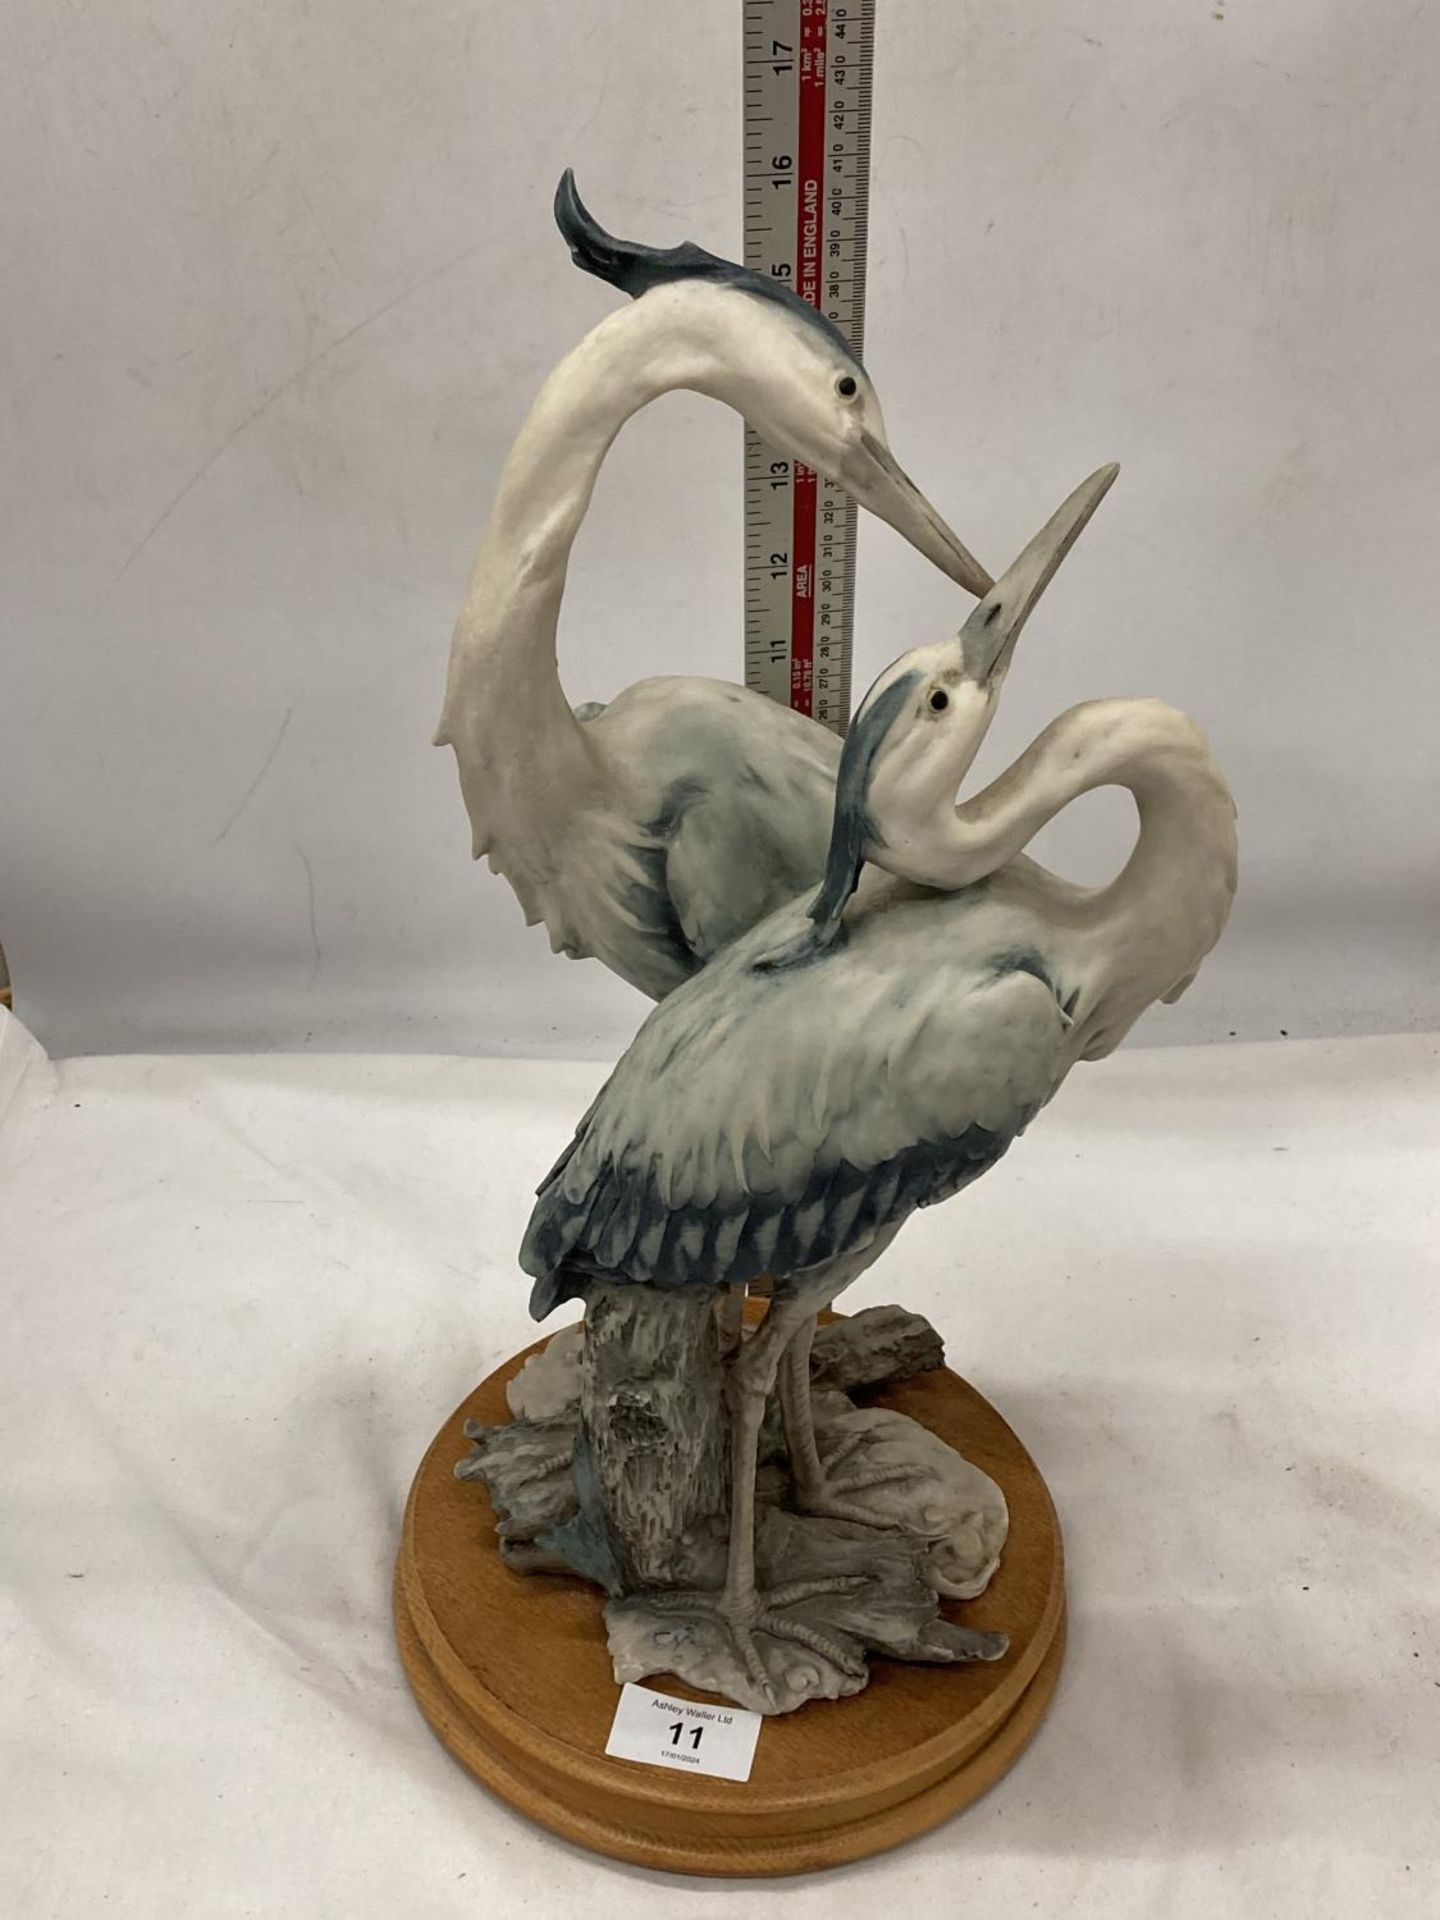 A CAPODIMONTE ITALIAN SCULPTURE OF TWO HERONS BY GIUSEPPE ARMANI HEIGHT 41 CM - Image 4 of 4